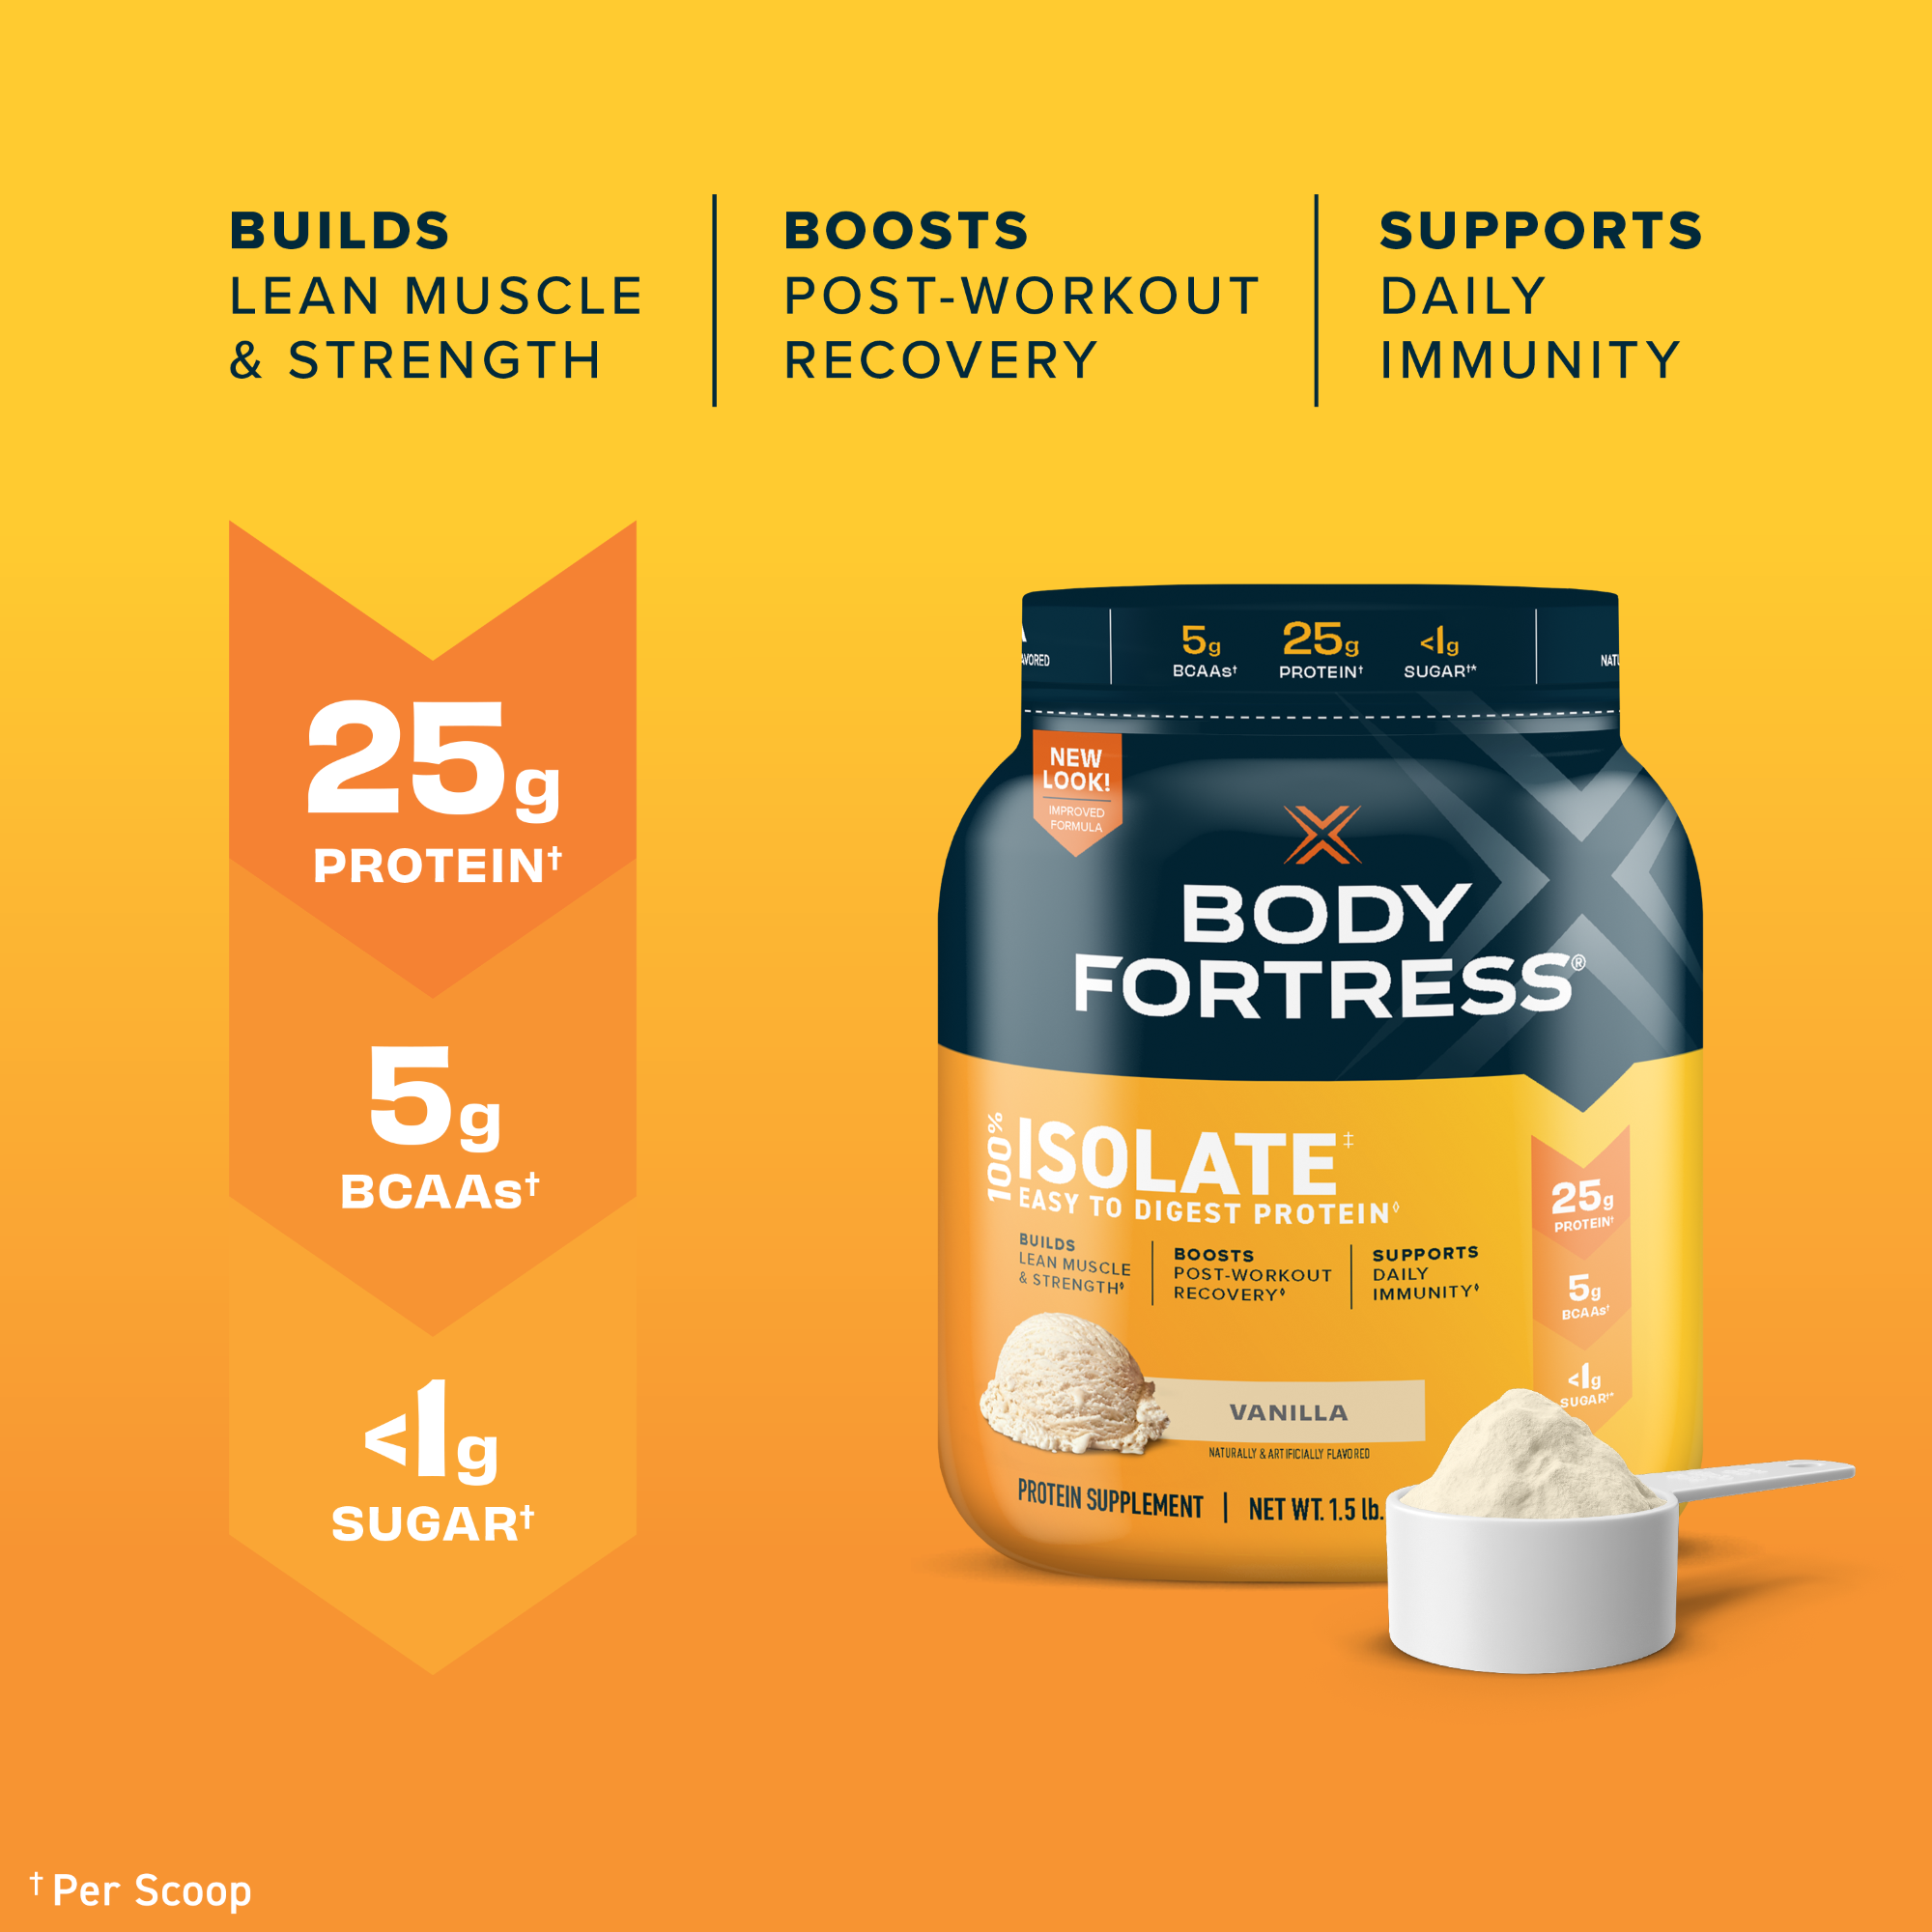 Body Fortress 100% Isolate Easy-to-Digest Protein Powder, Vanilla, 1.5lbs - image 3 of 8